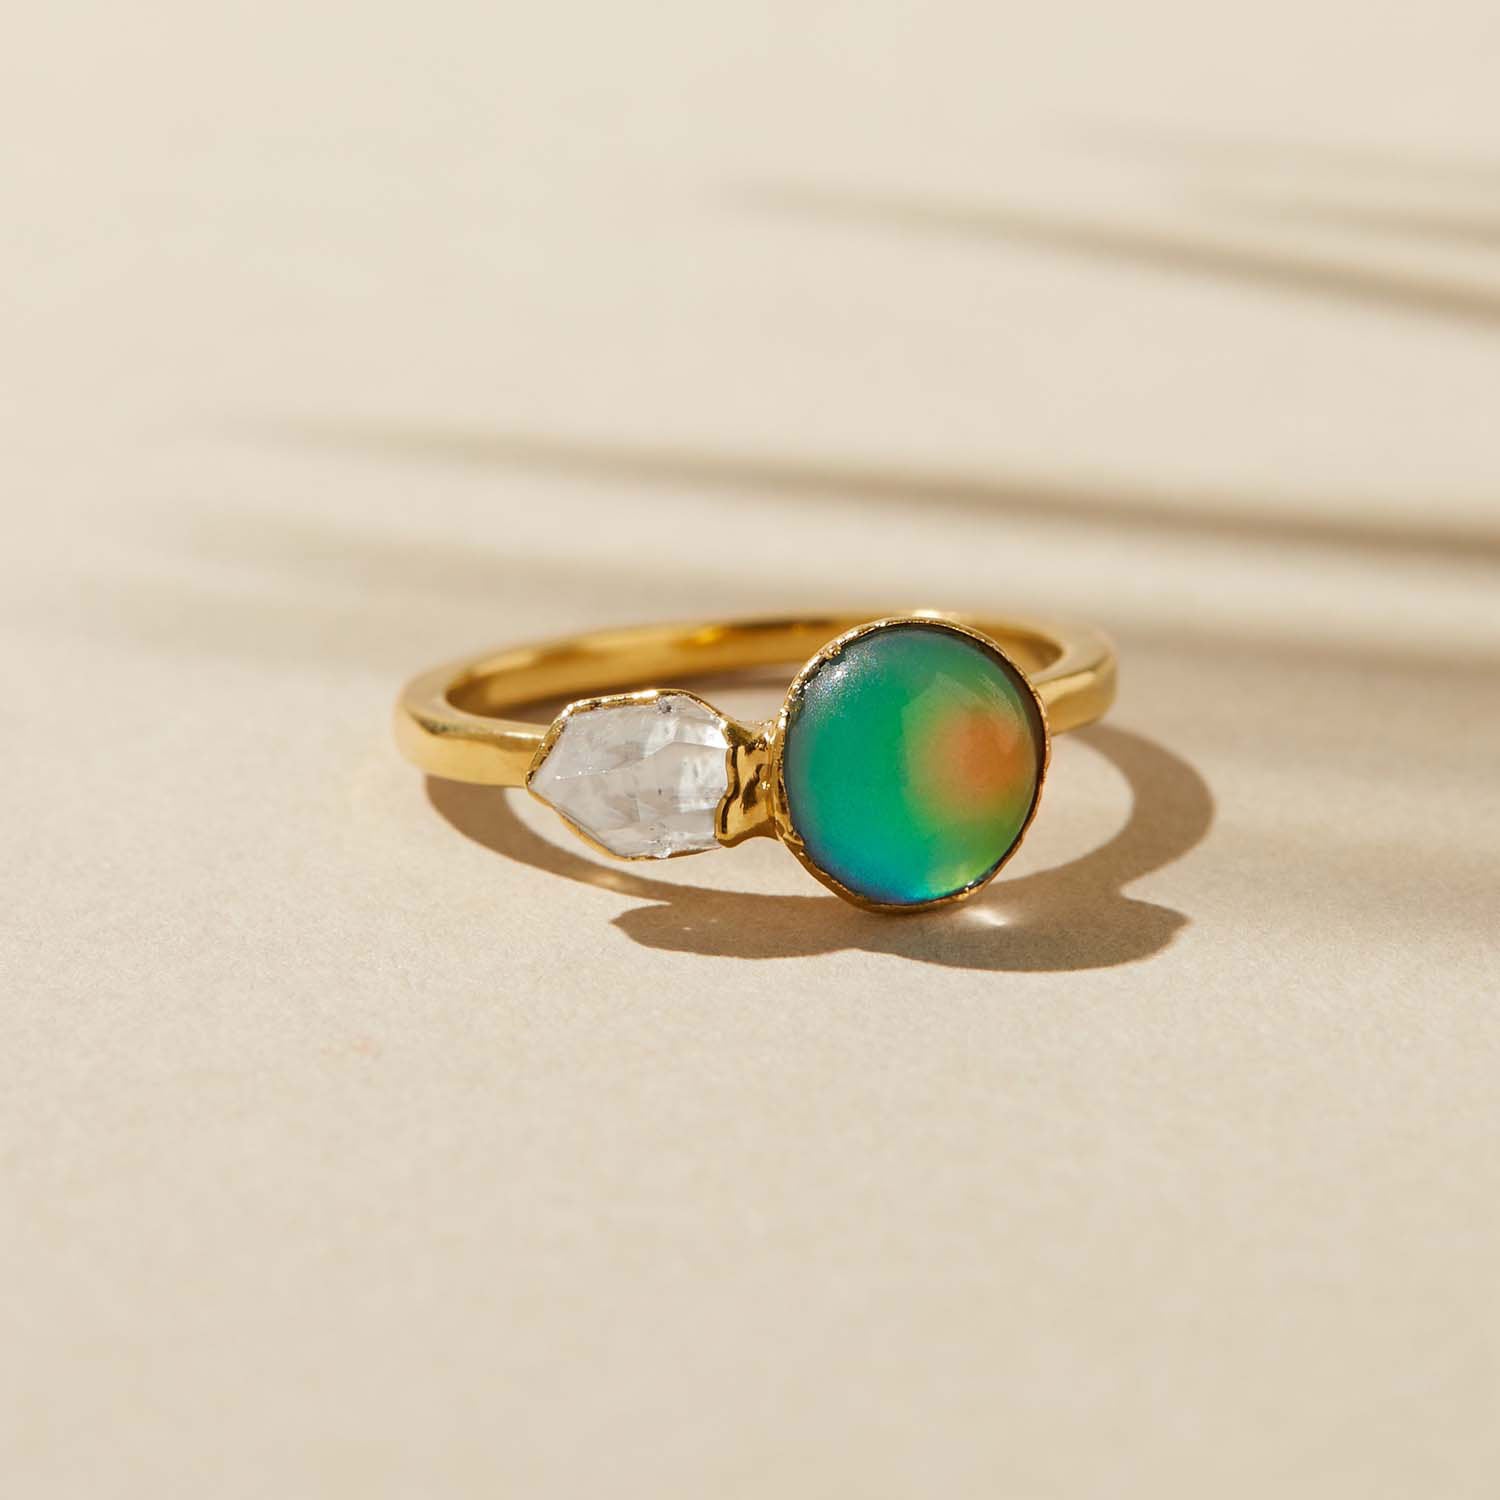 What Does Green Mean on a Mood Ring? – Dani Barbe